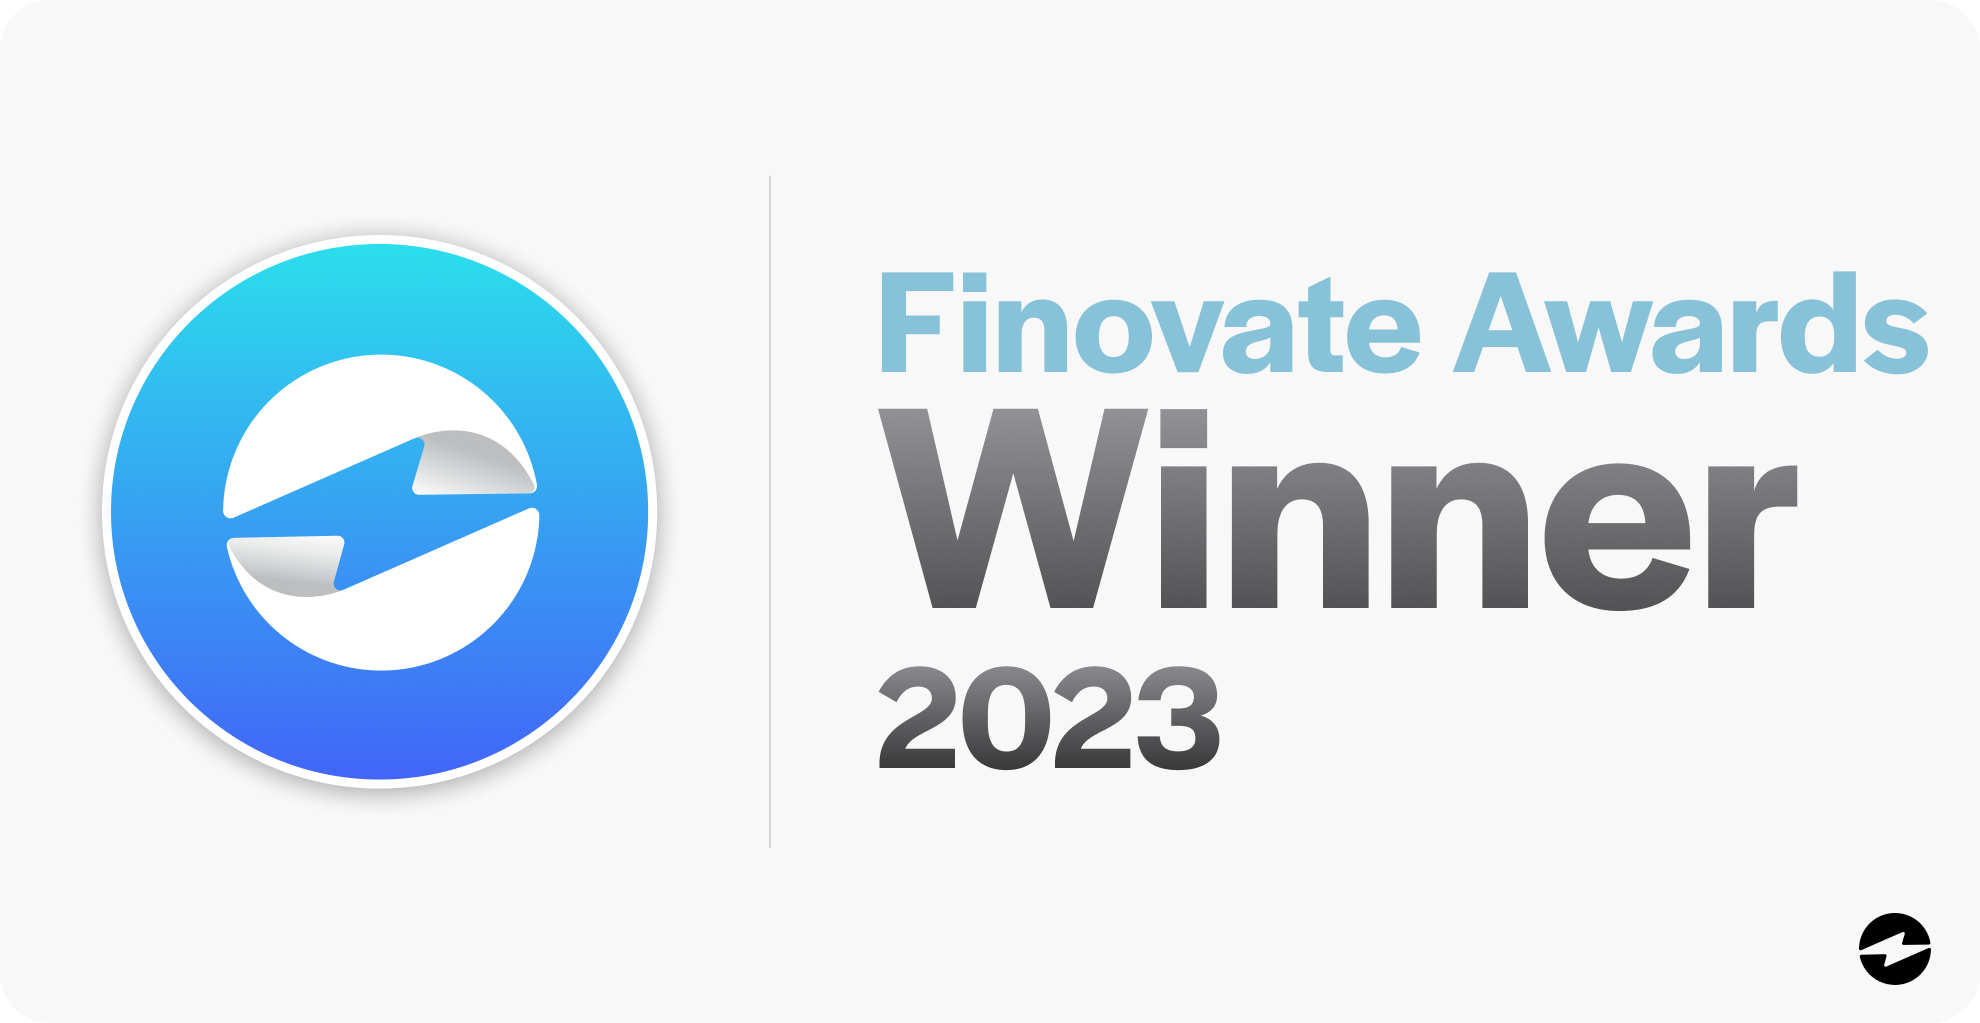 EBizCharge awarded the Best Enterprise Payments Solution in the 2023 Finovate Awards